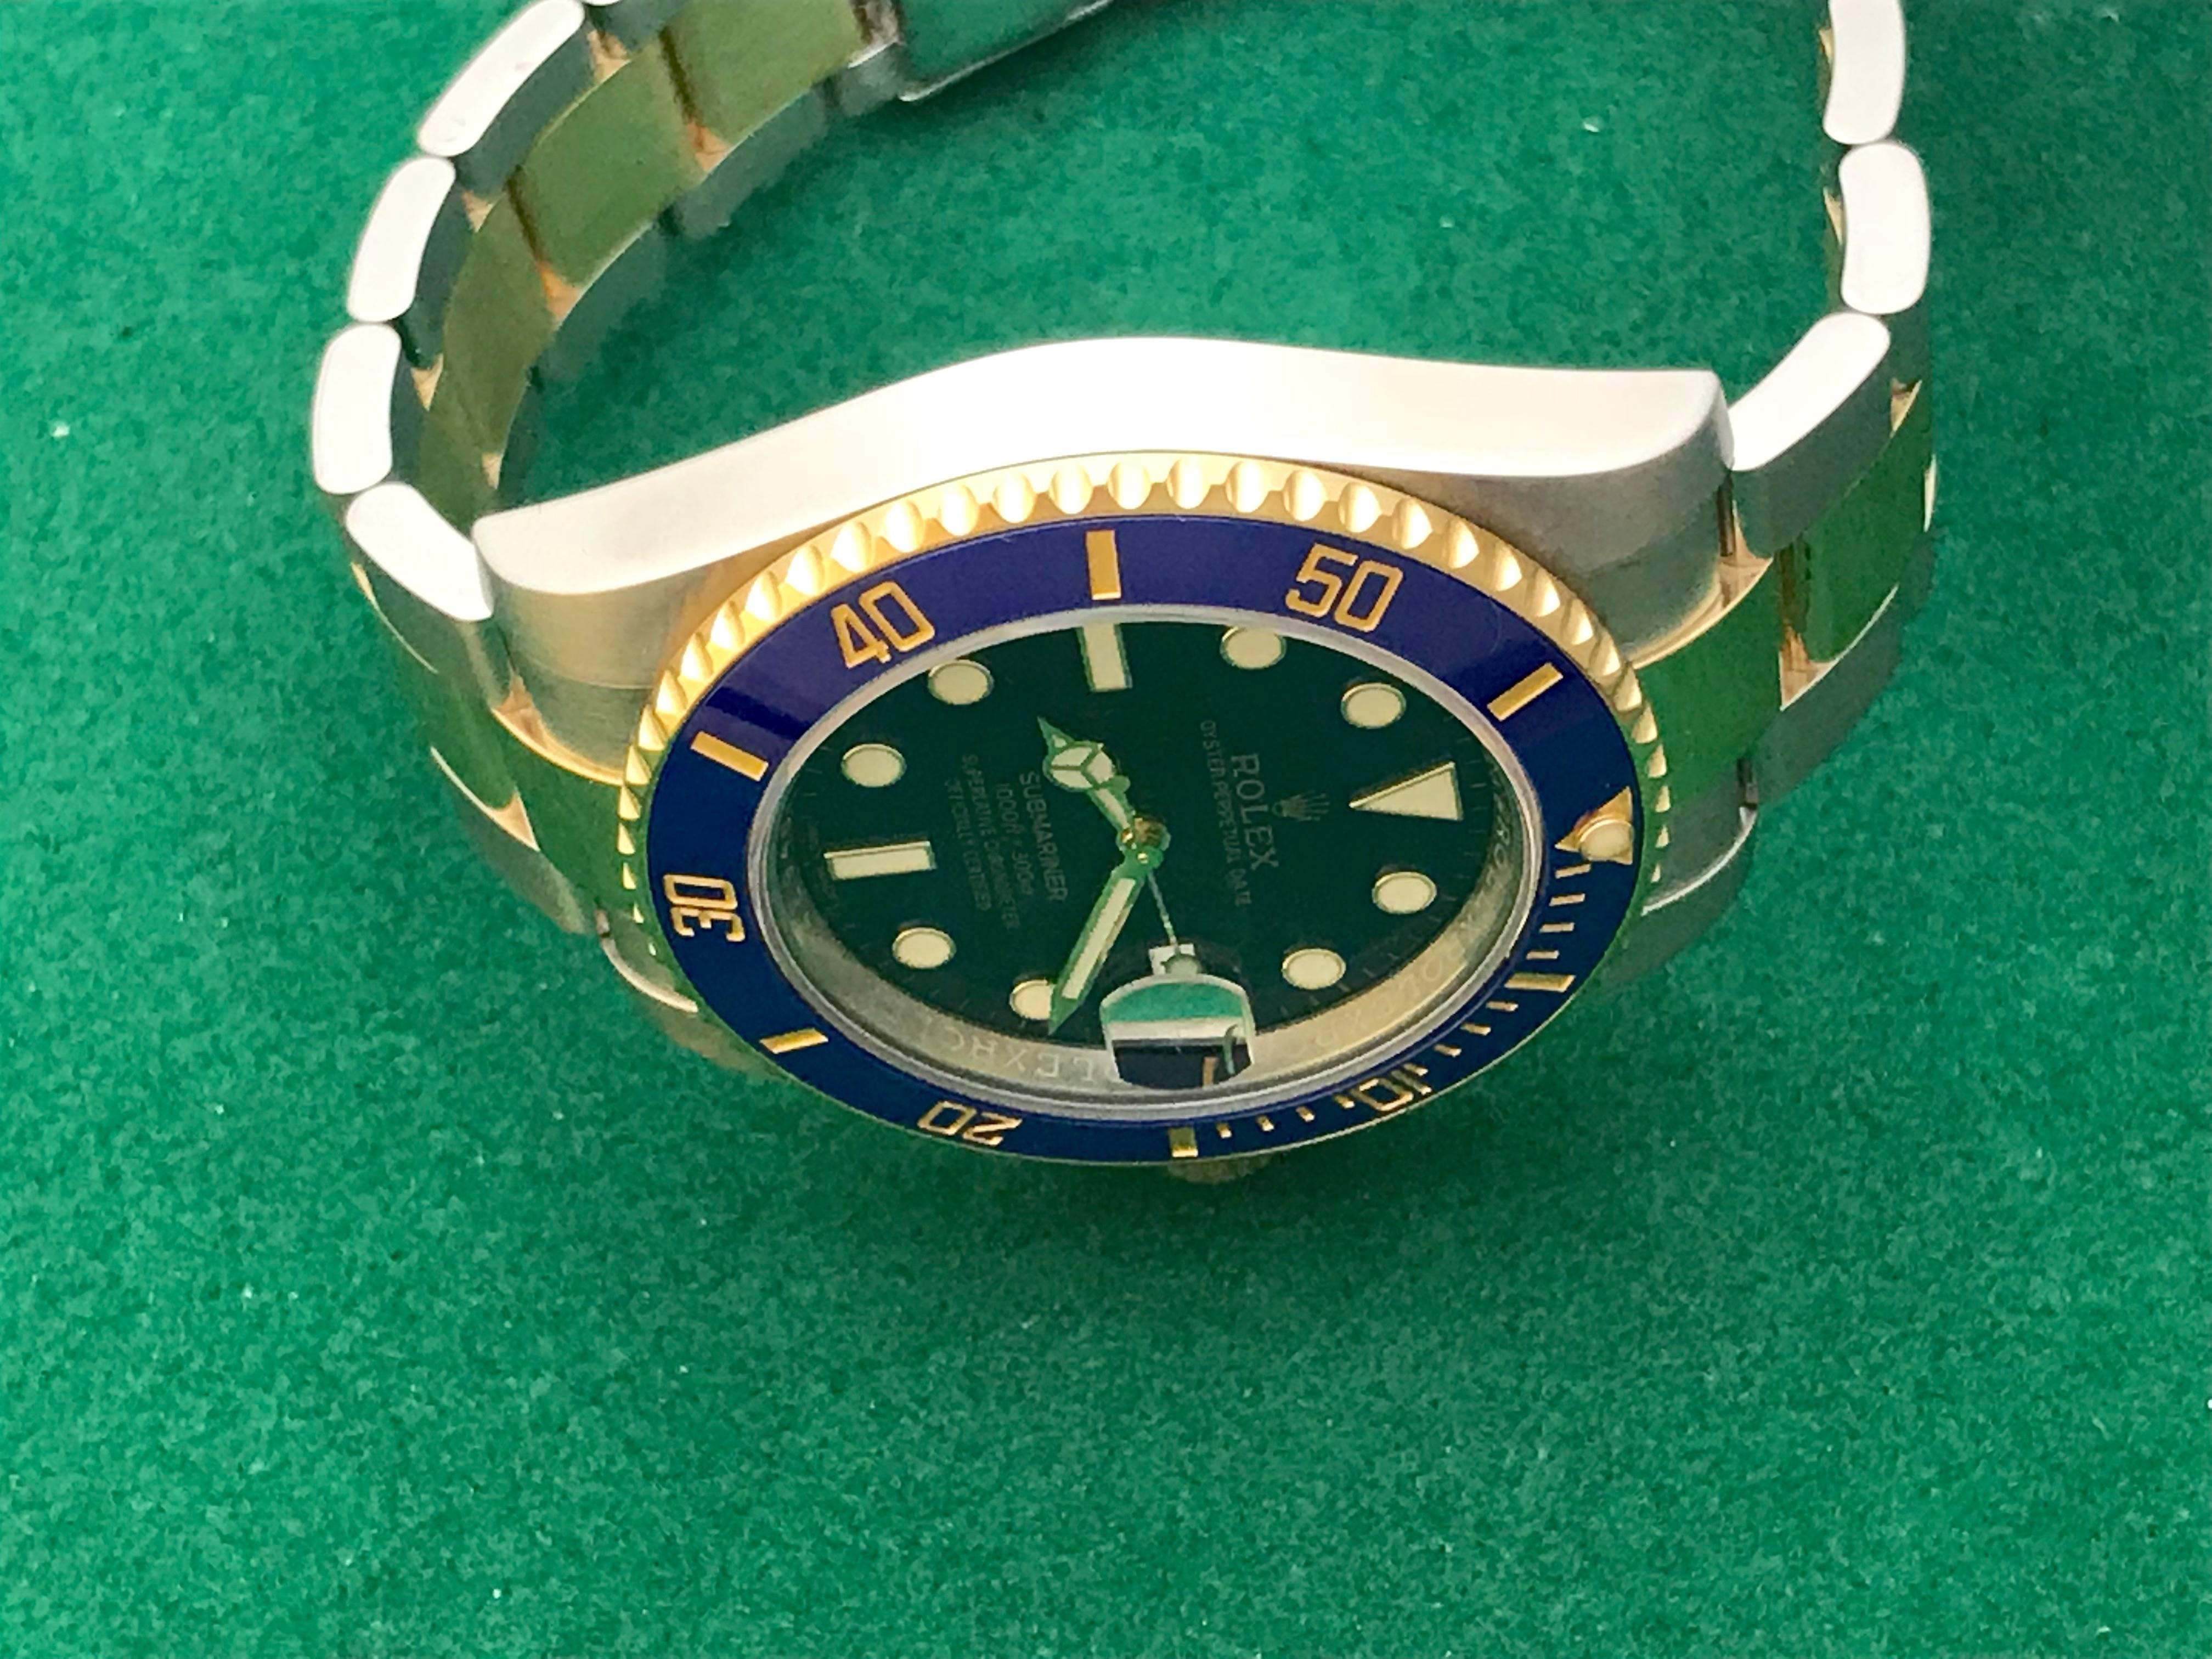 Rolex Submariner Oyster Perpetual Date Automatic Wristwatch Model 116613LB 1